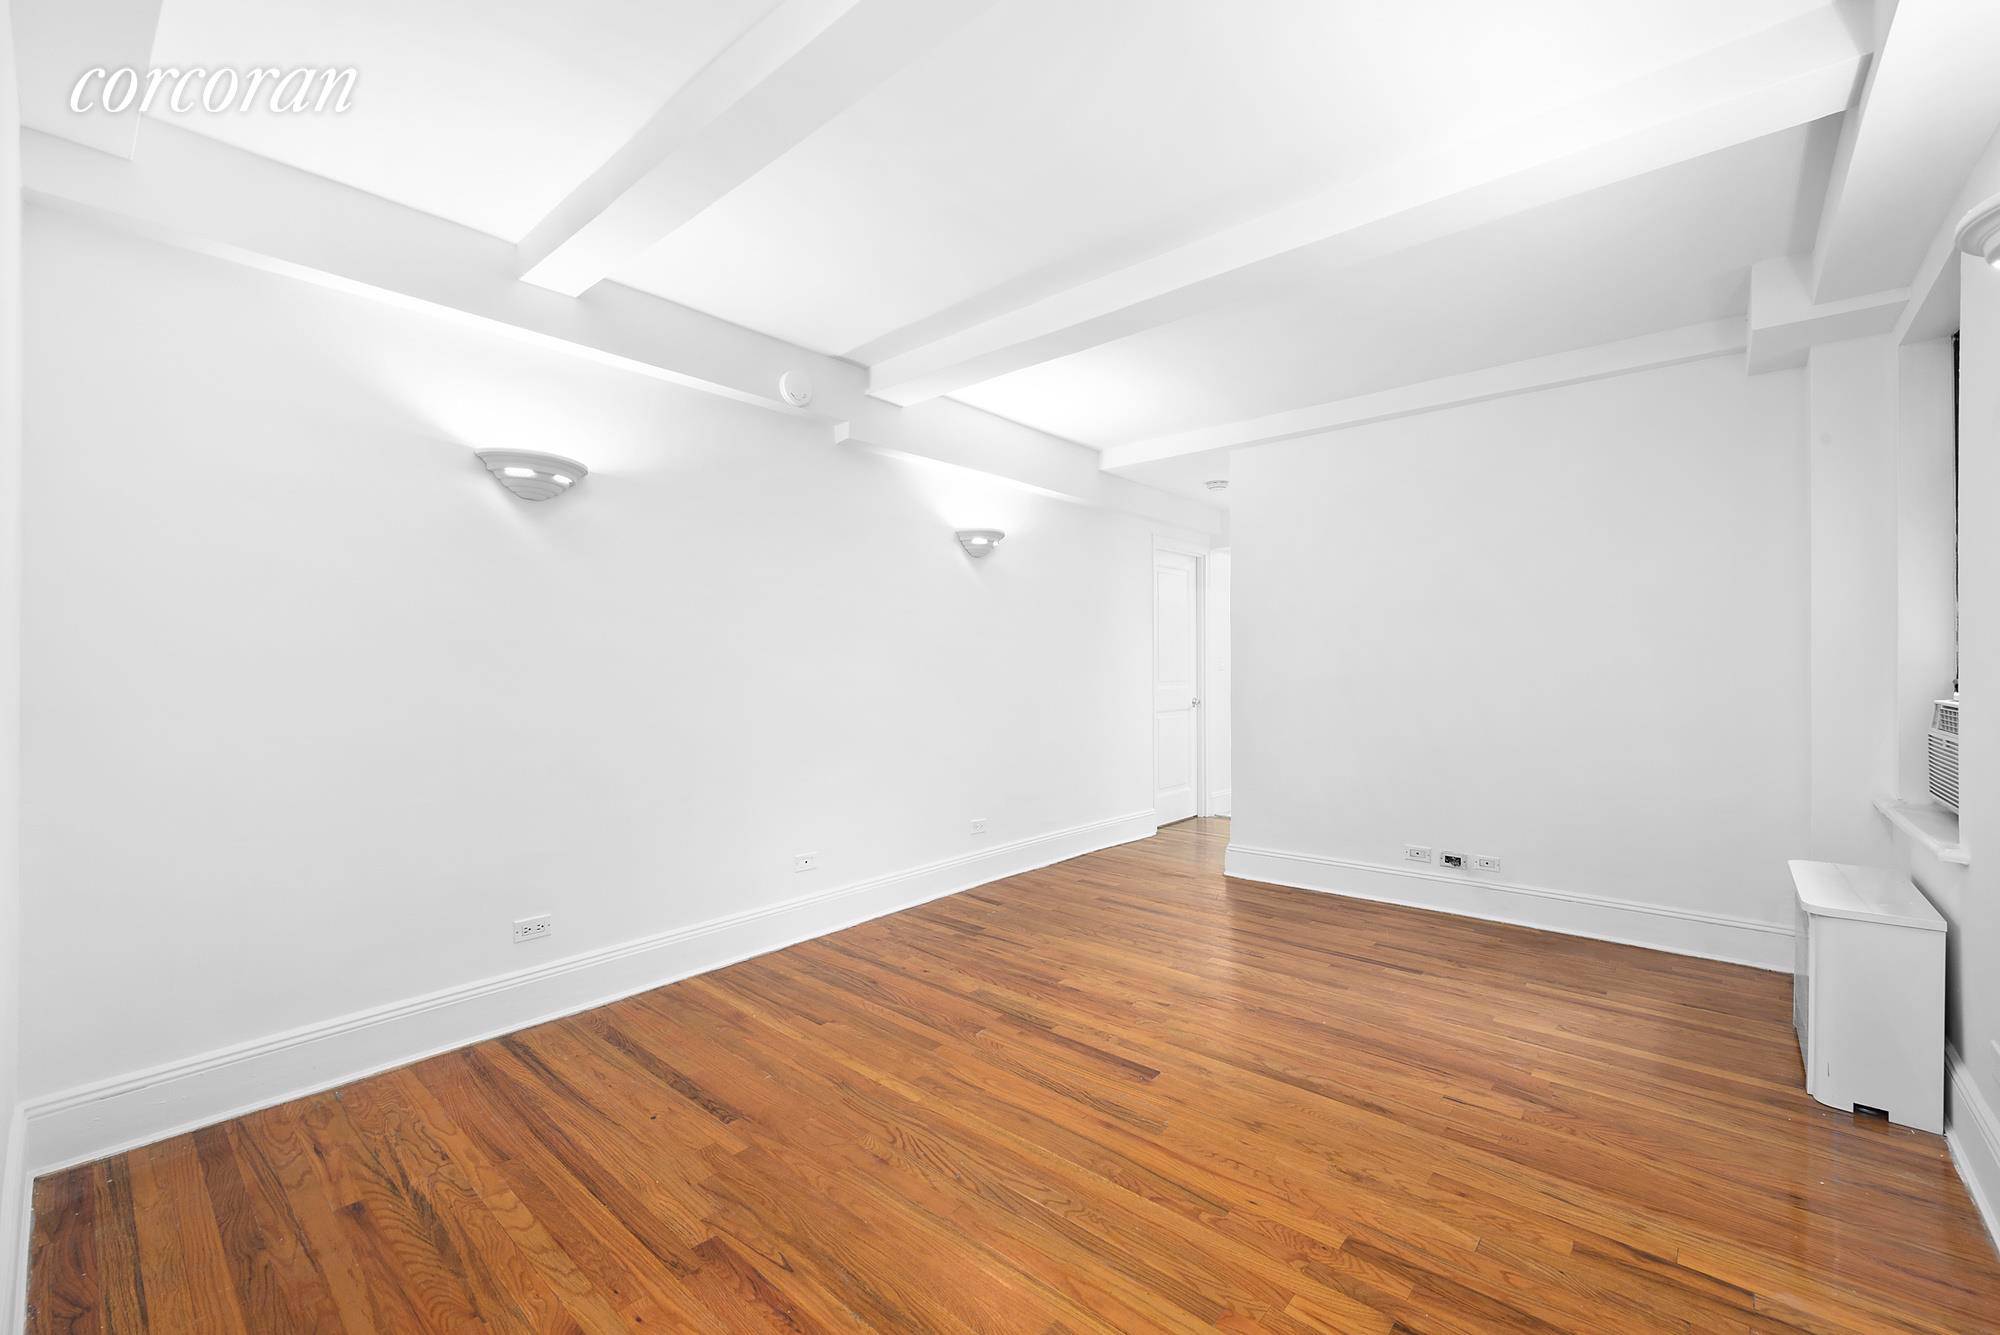 True 2 bedroom condo in North Chelsea features renovated kitchen with dishwasher and plenty of cabinets.